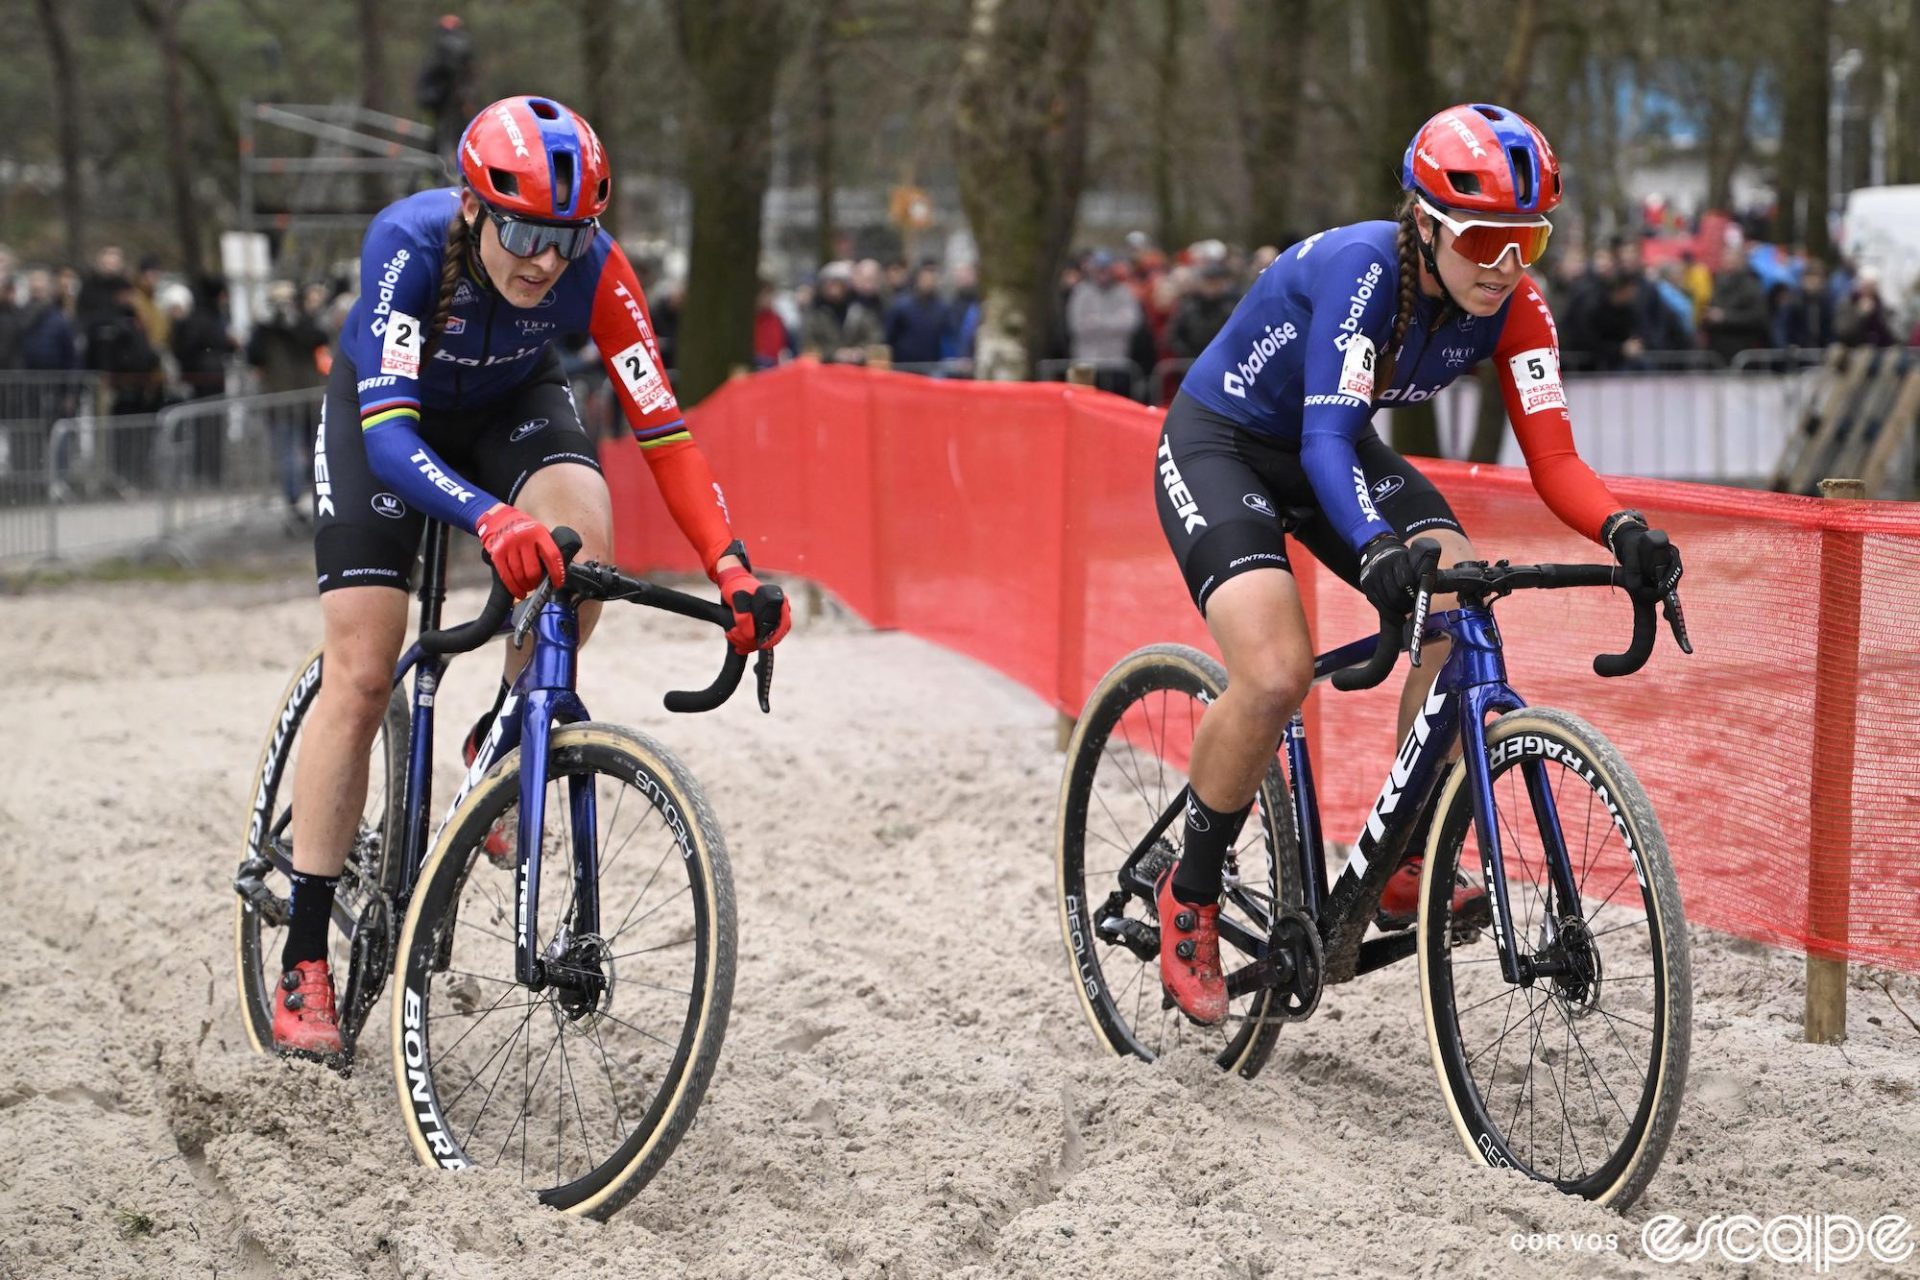 Lucinda Brand and Shirin van Anrooij battle for the early lead in a sandy section at the Zilvermeercross.